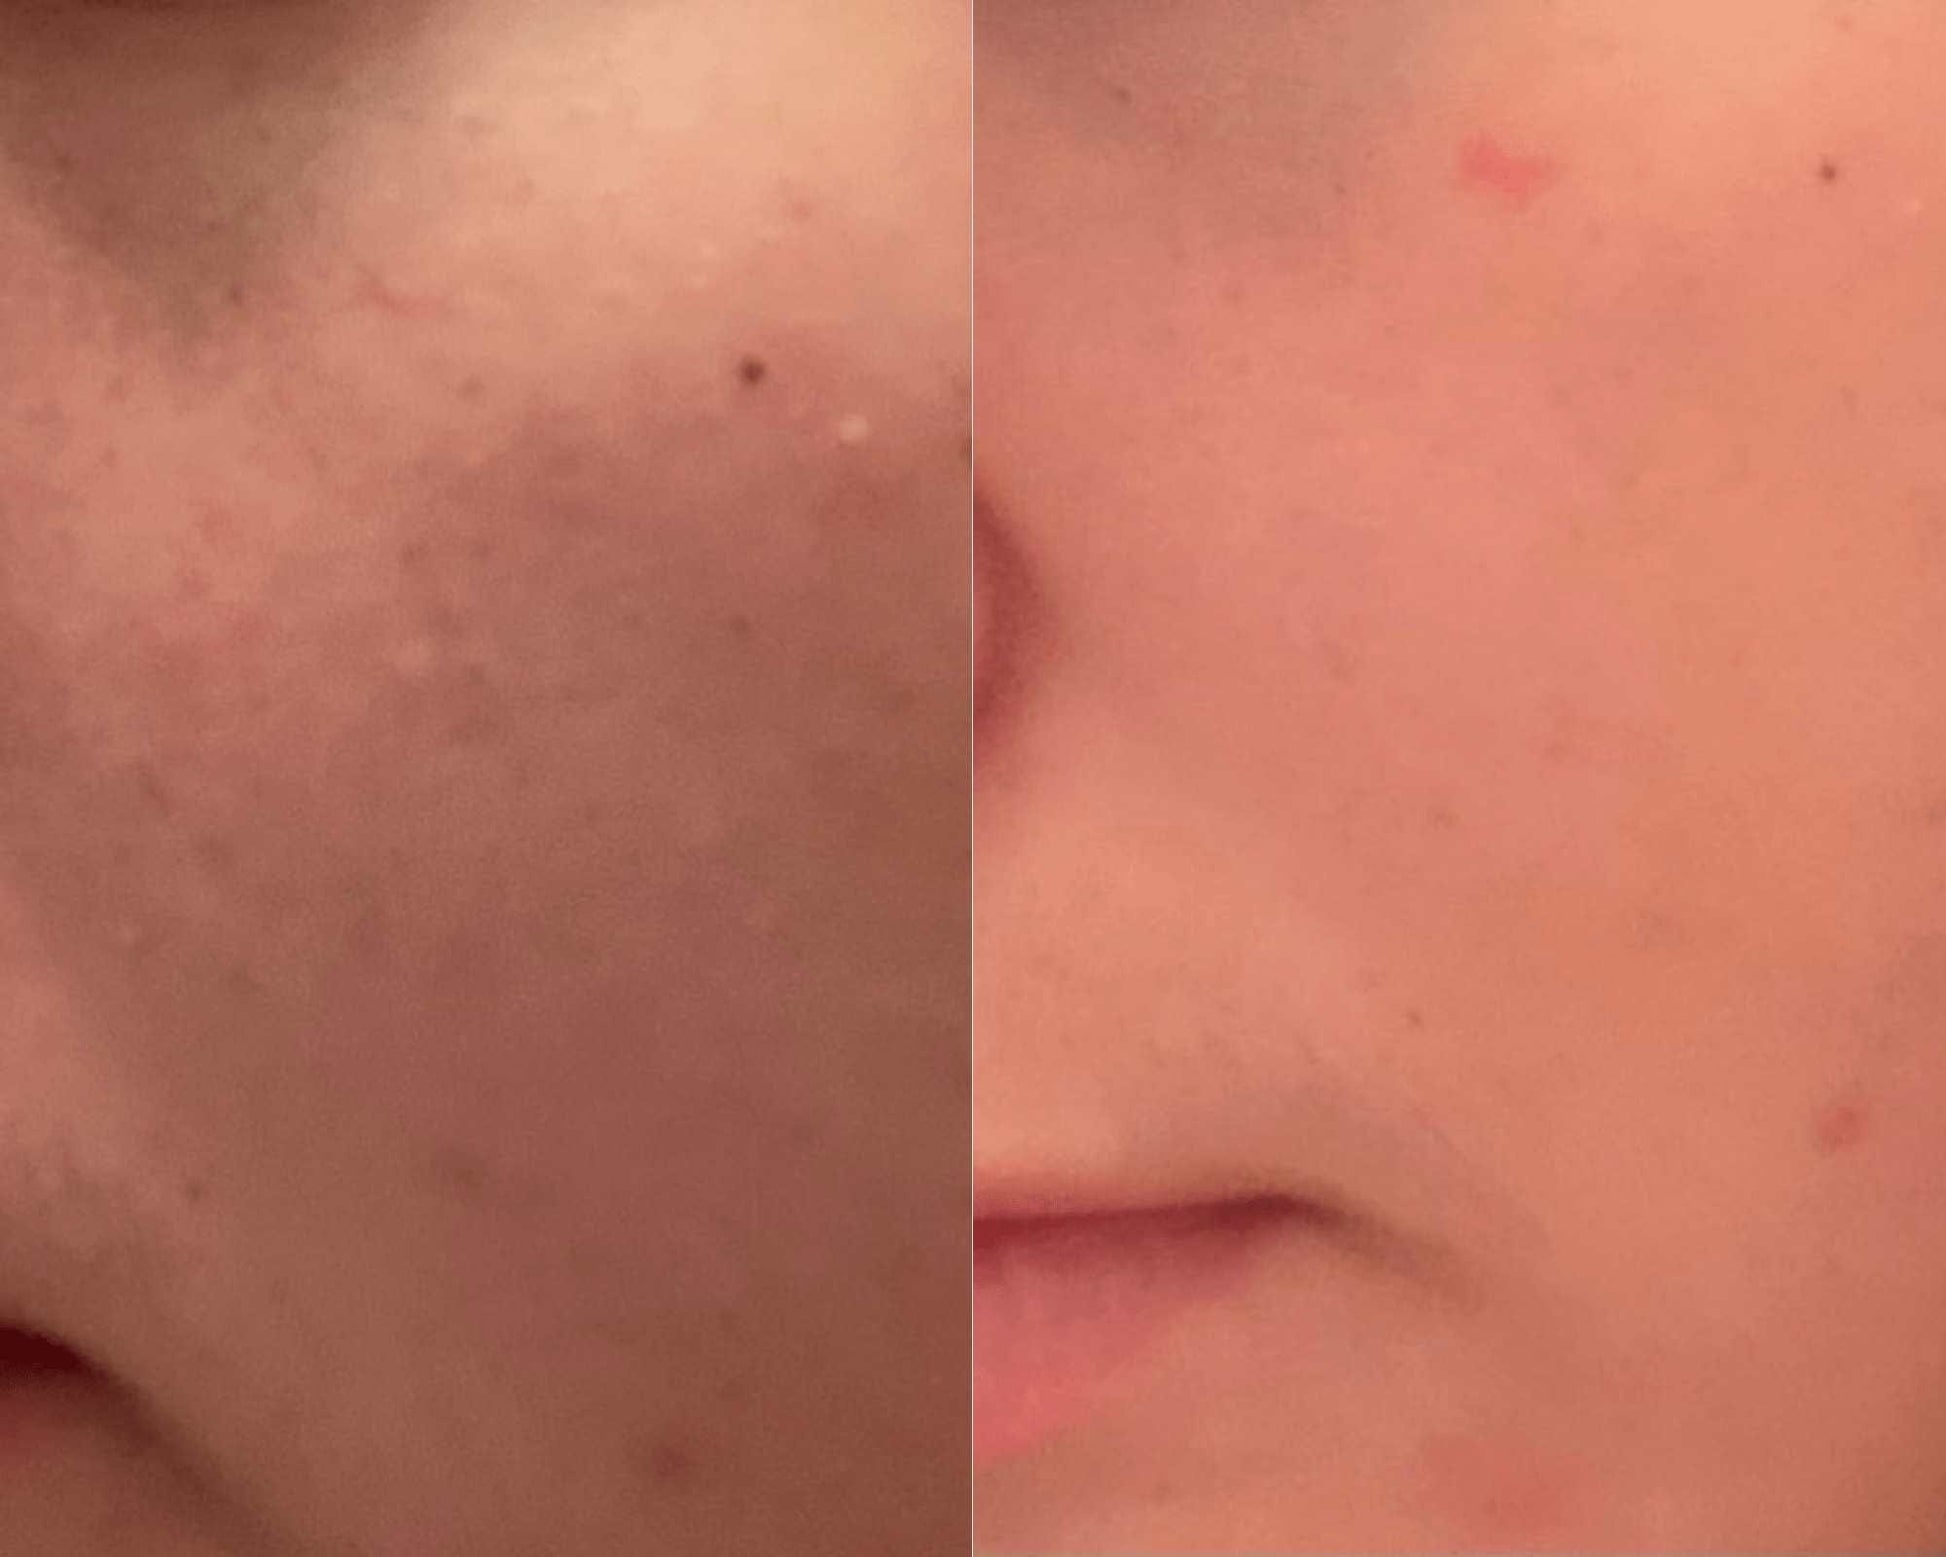 Clear skin before and after 